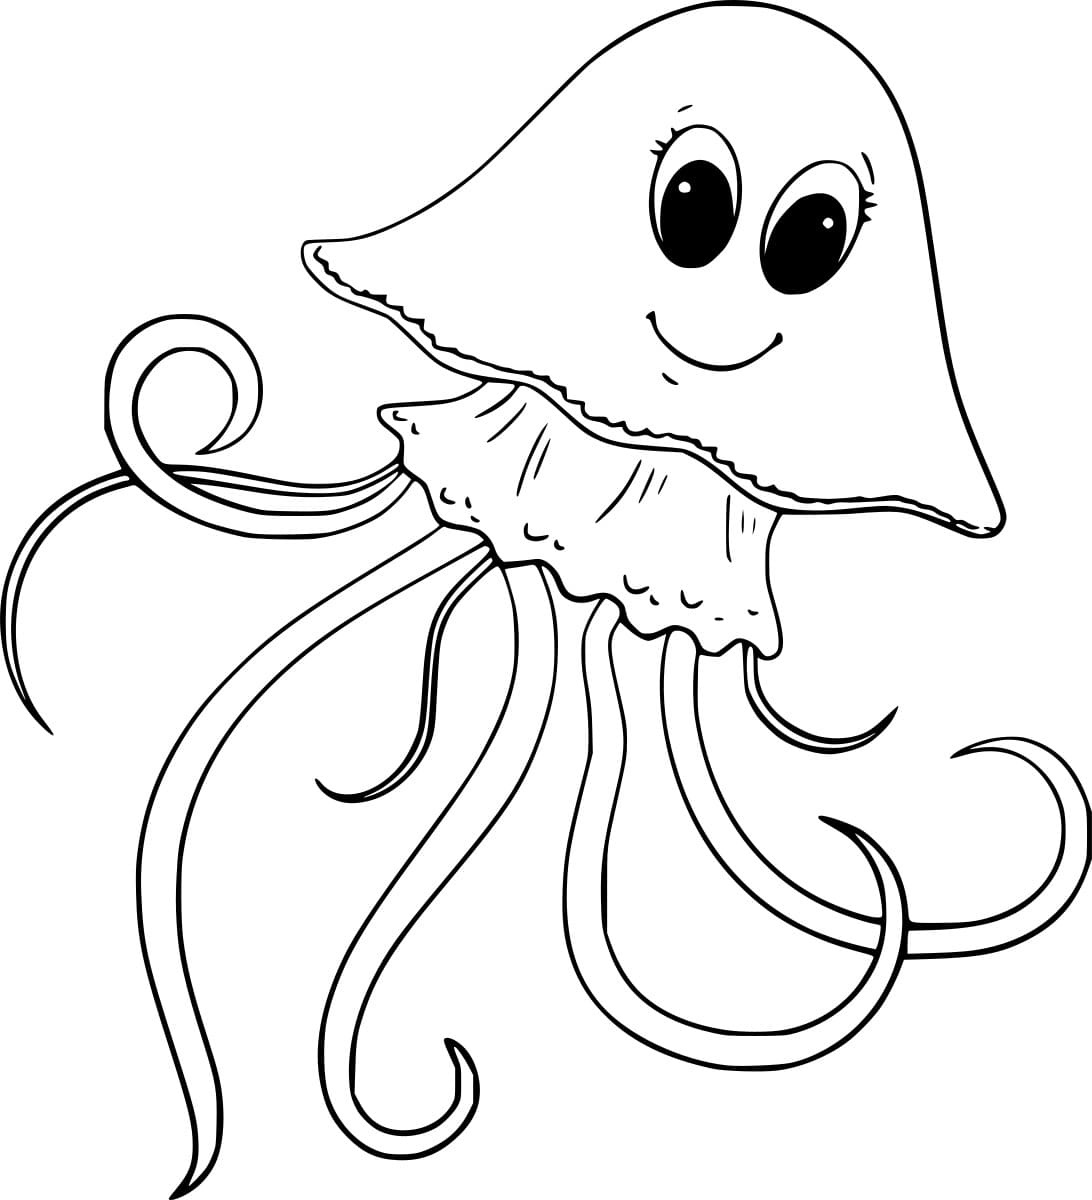 Blue Blubber Jellyfish Image Coloring Page